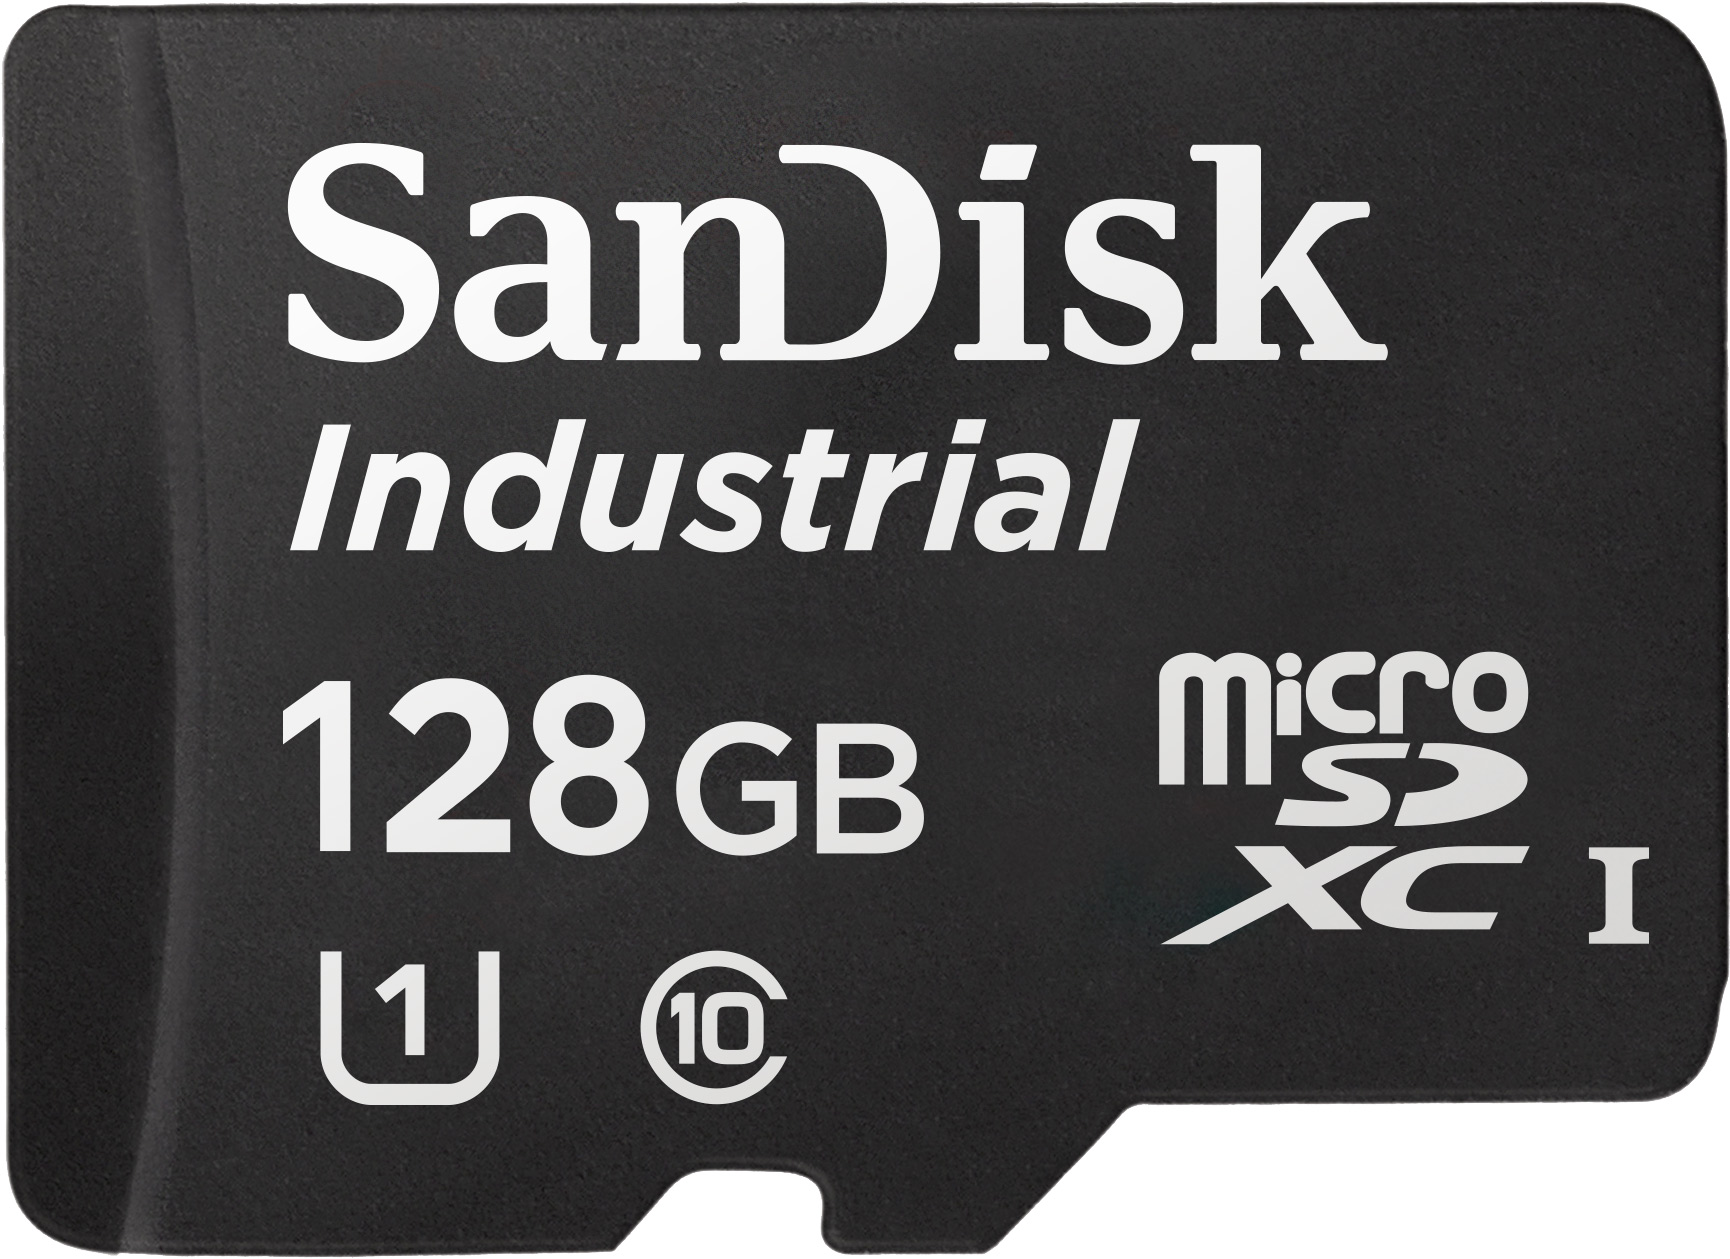 SanDisk SD and and Automotive: Extreme Temps, Upped Reliability